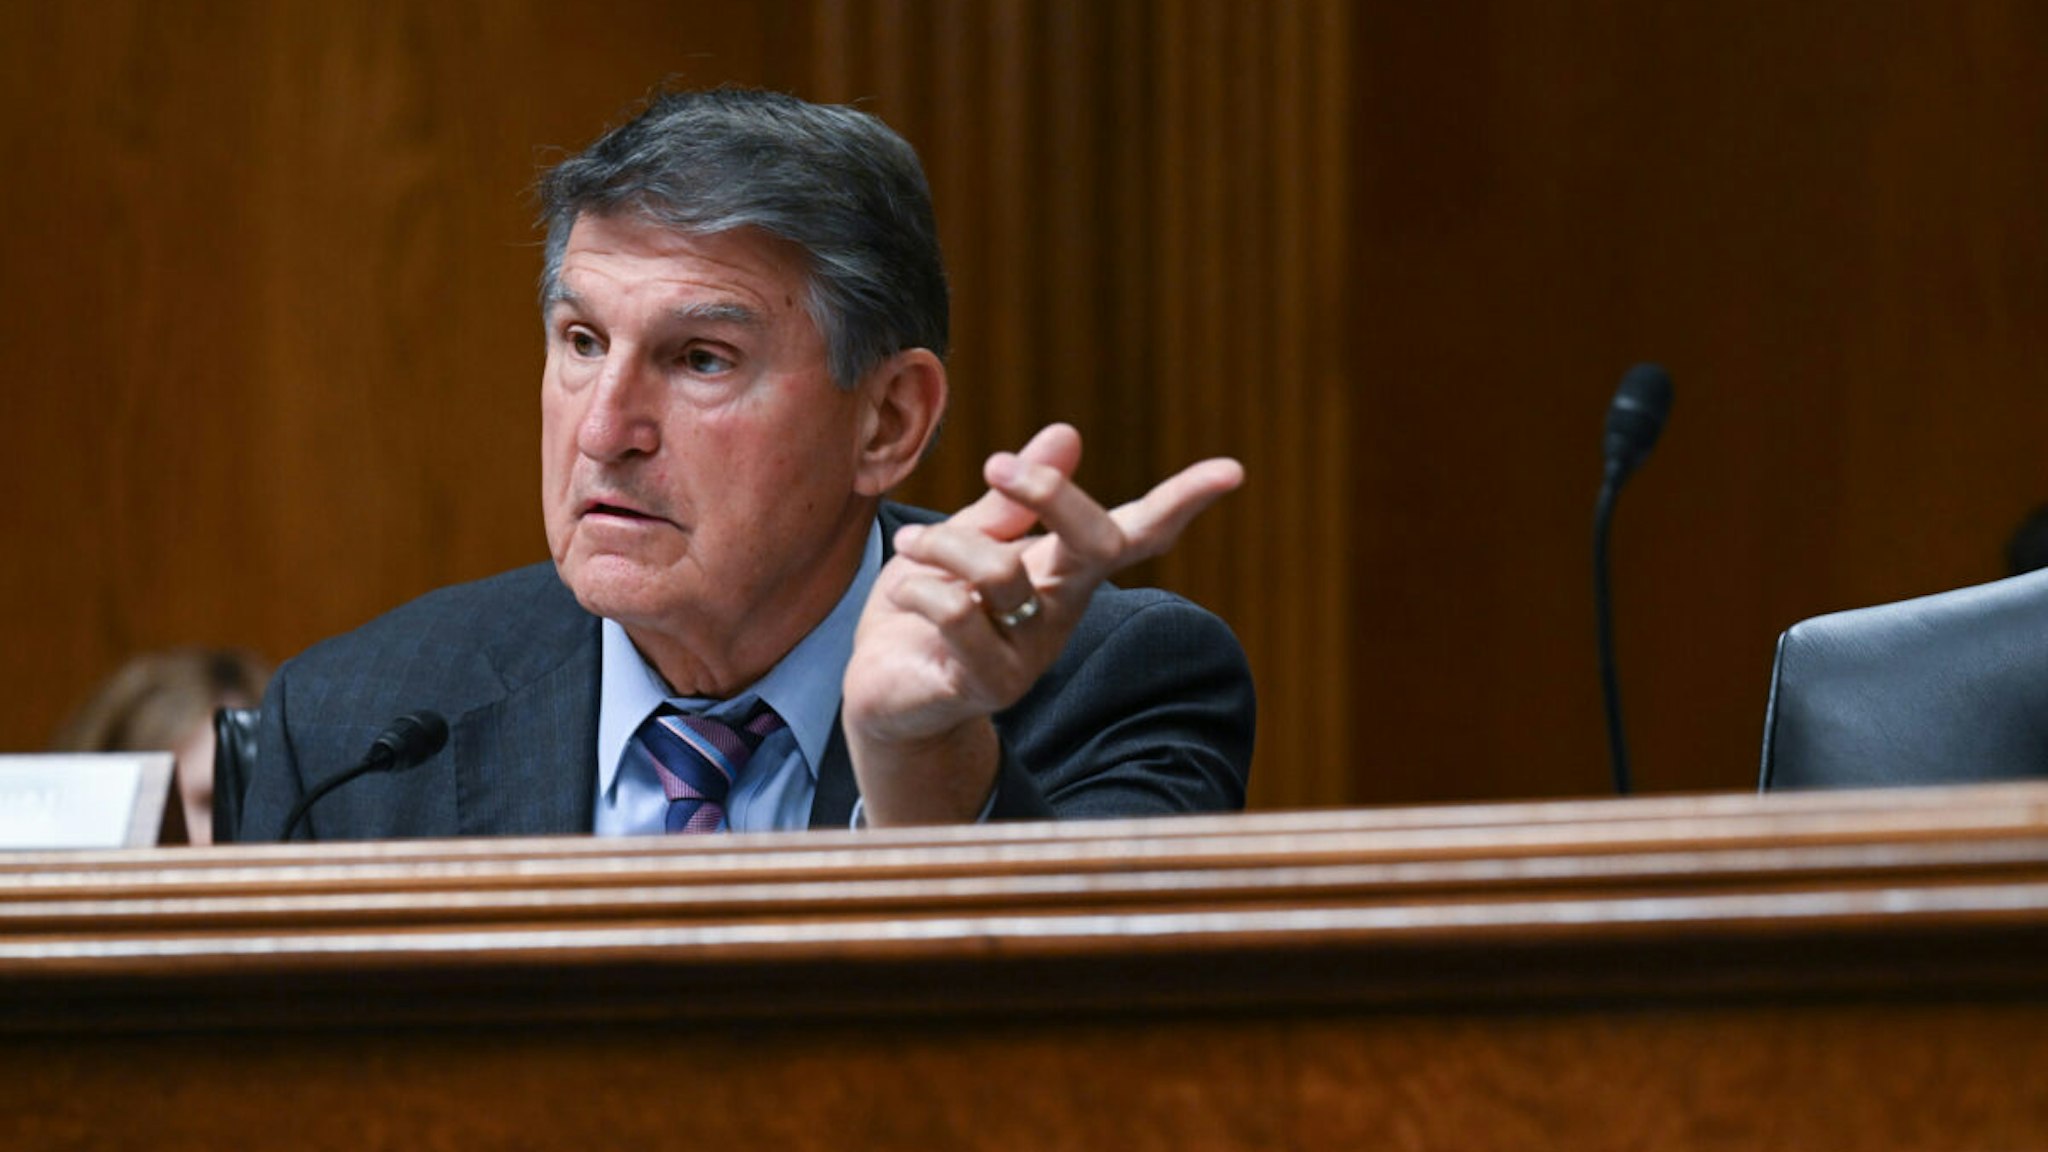 Senator Joe Manchin (D-WV) speaks to Chairwomen of the Federal Communications Commission Jessica Rosenworcel during a Senate Appropriations Subcommittee on Financial Servieces and General Government Hearings at the Dirksen Senate Office Building on Tuesday September 19, 2023 in Washington, DC.